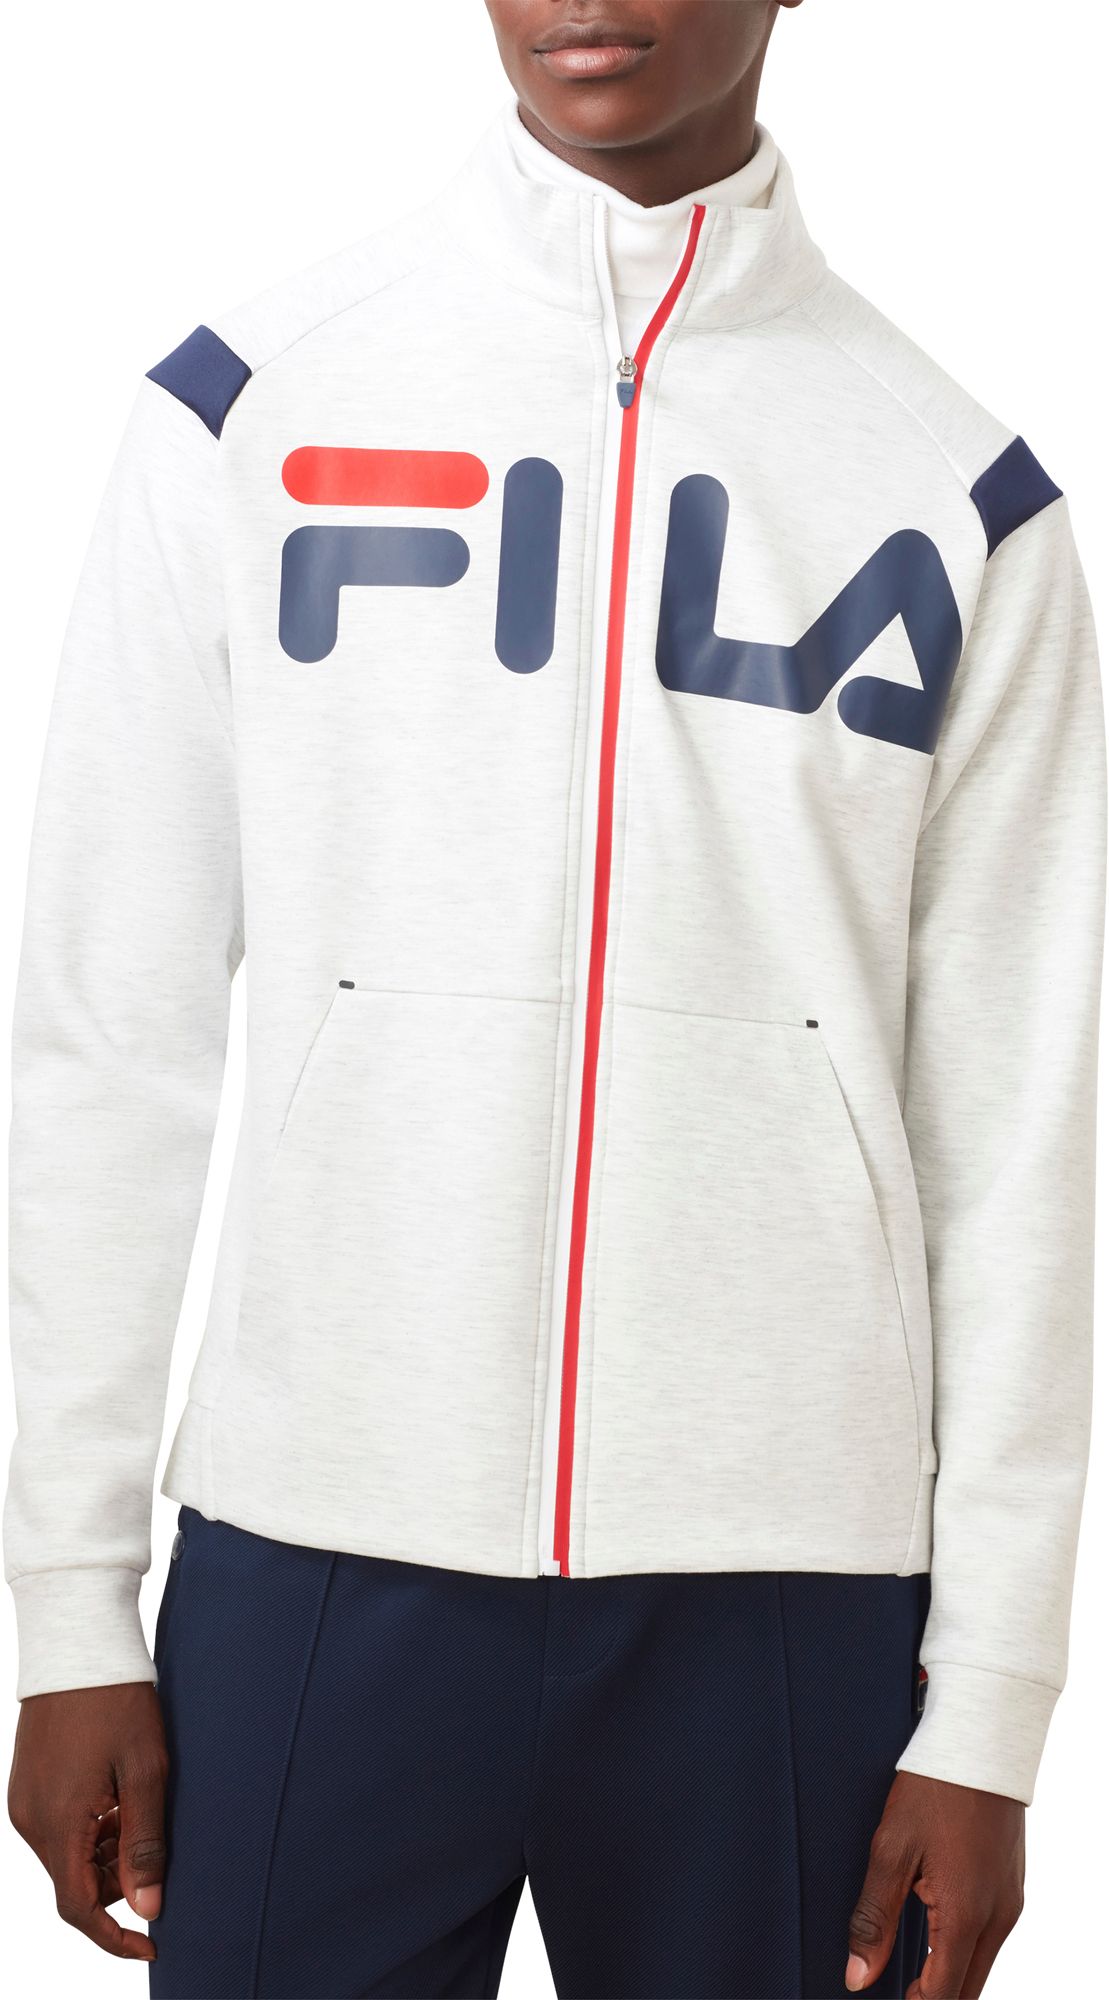 AJh,fila sweat suits for